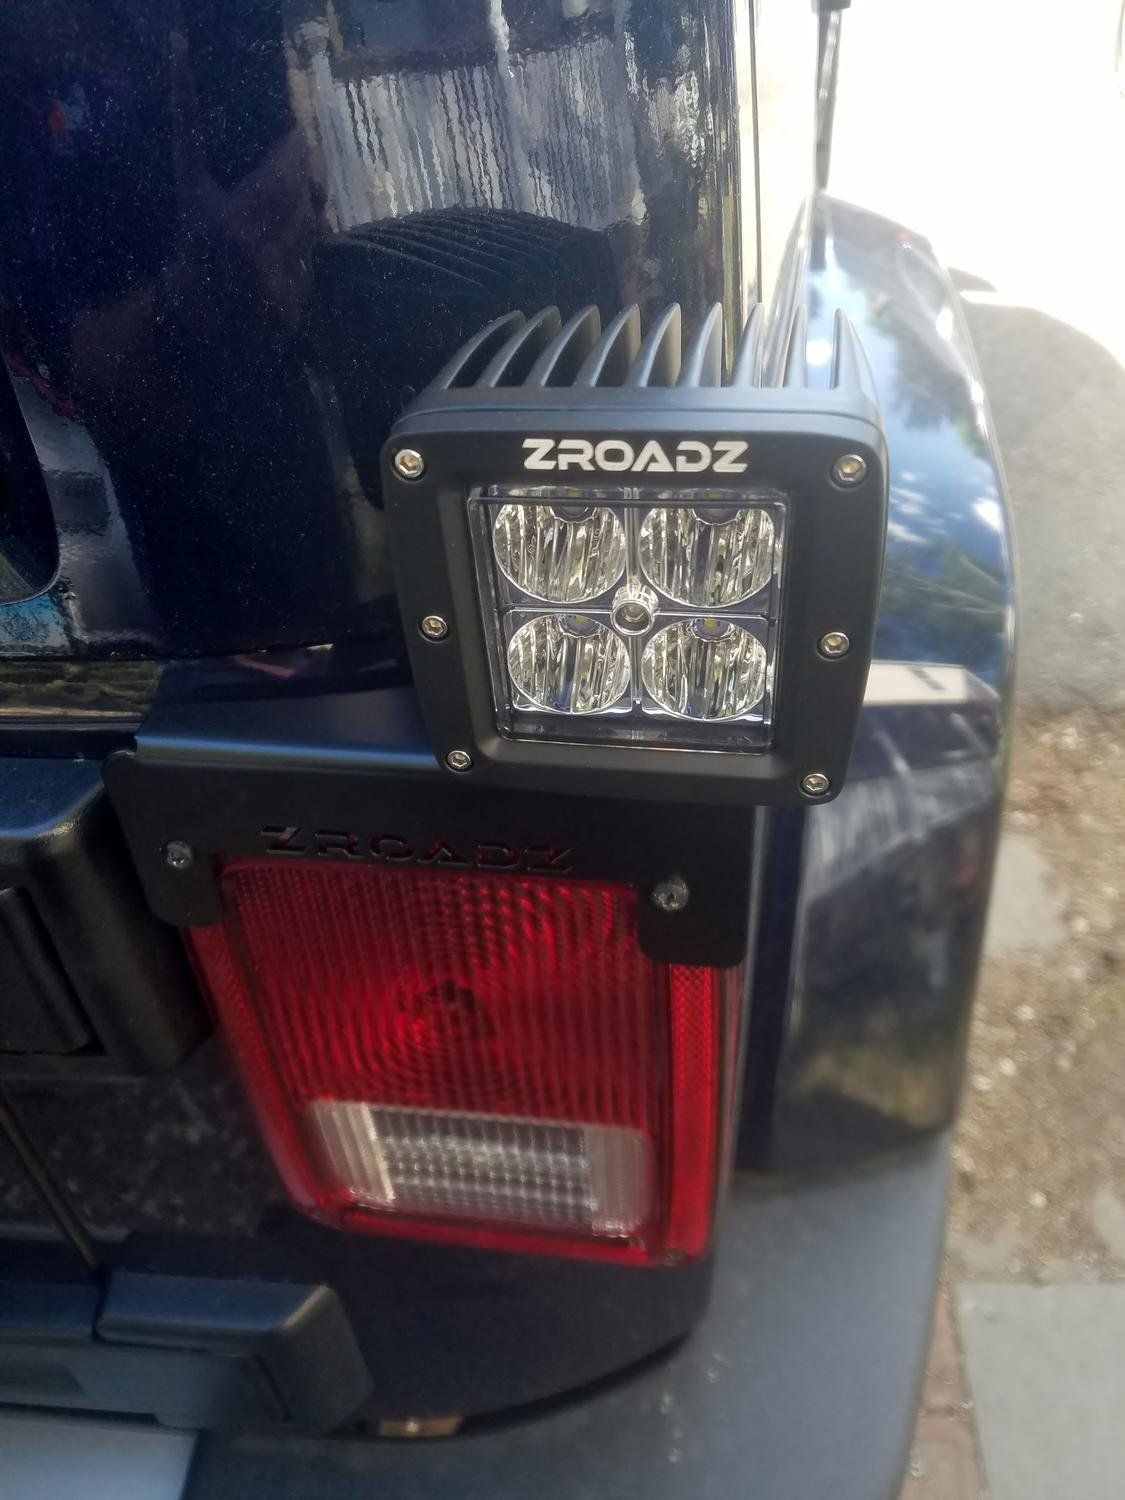 This kit includes everything necessary to mount 3" LED lights on top of the rear tail lights on the Wrangler JK The mounting brackets Bolt to the rear